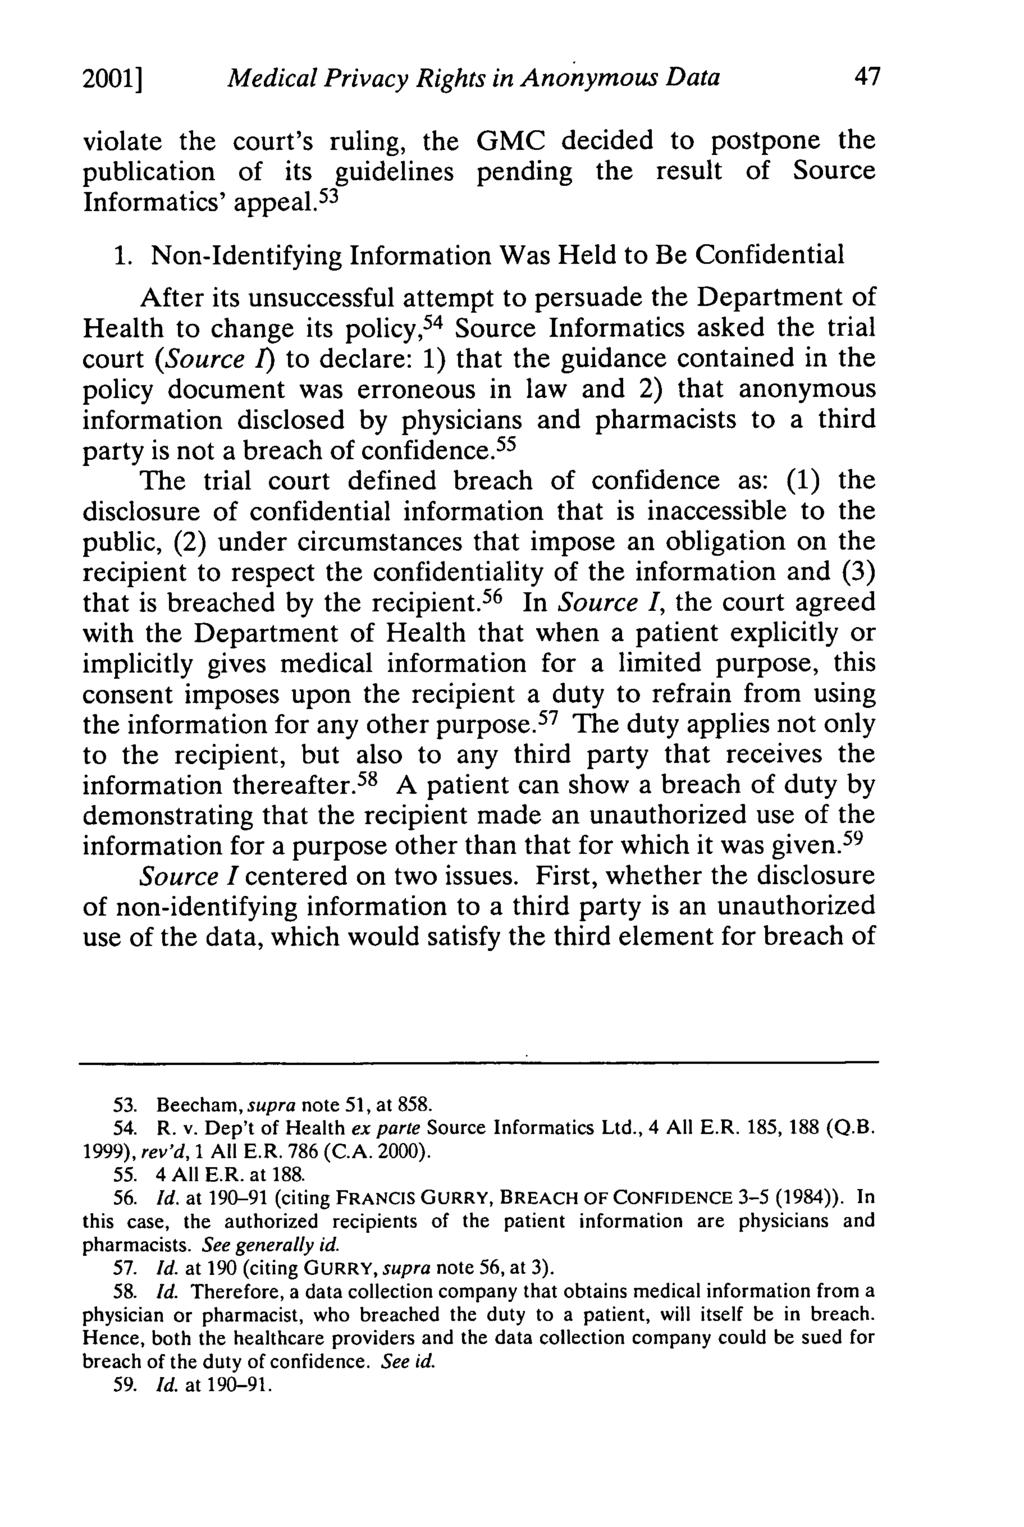 2001] Medical Privacy Rights in Anonymous Data violate the court's ruling, the GMC decided to postpone the publication of its guidelines pending the result of Source Informatics' appeal. 53 1.